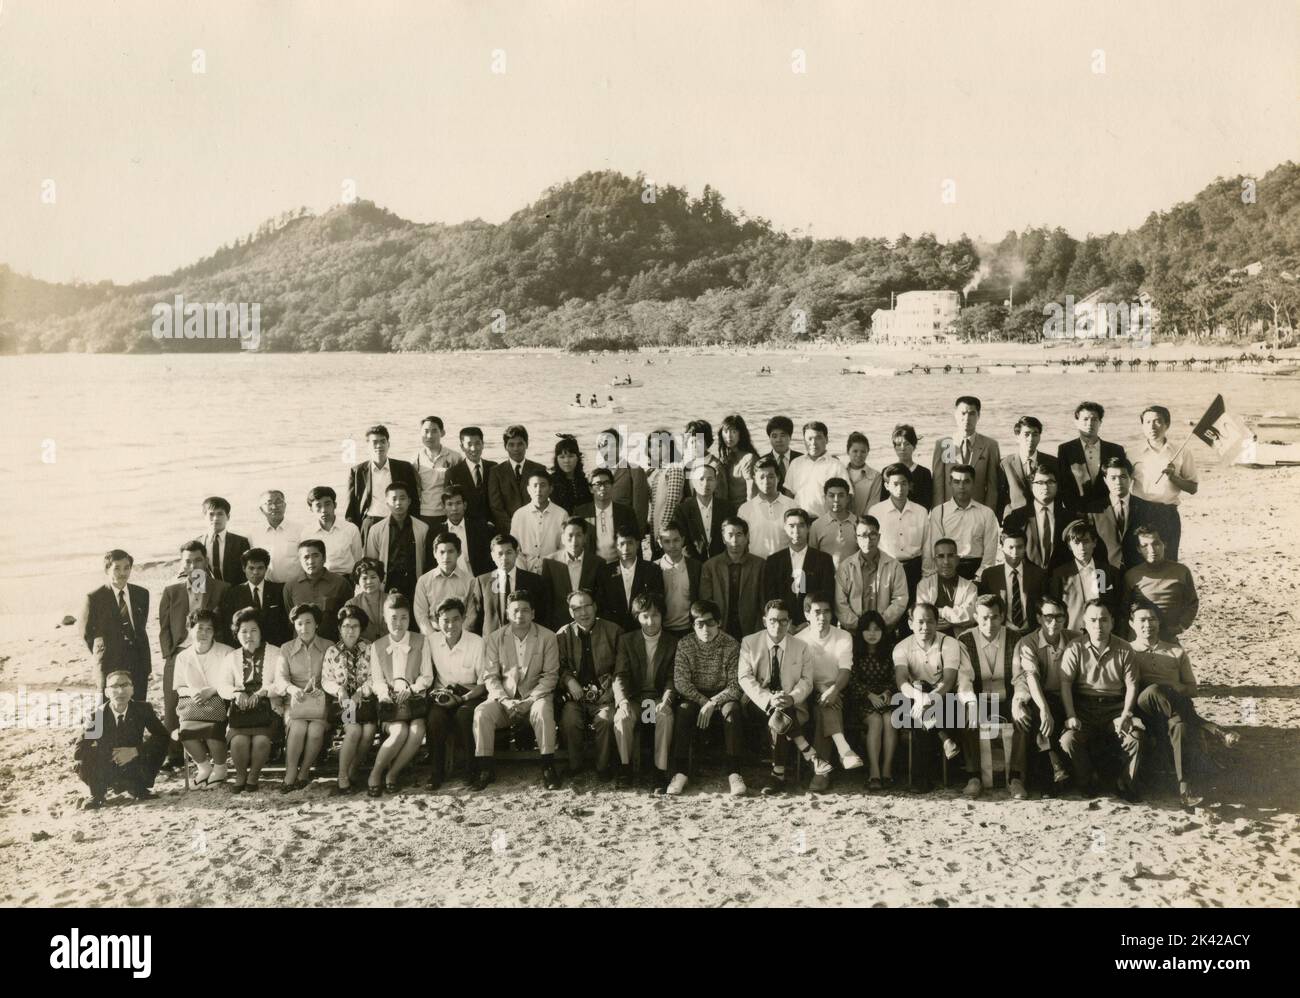 Large group of Japanese people outside posing for the photo, 1950s Stock Photo